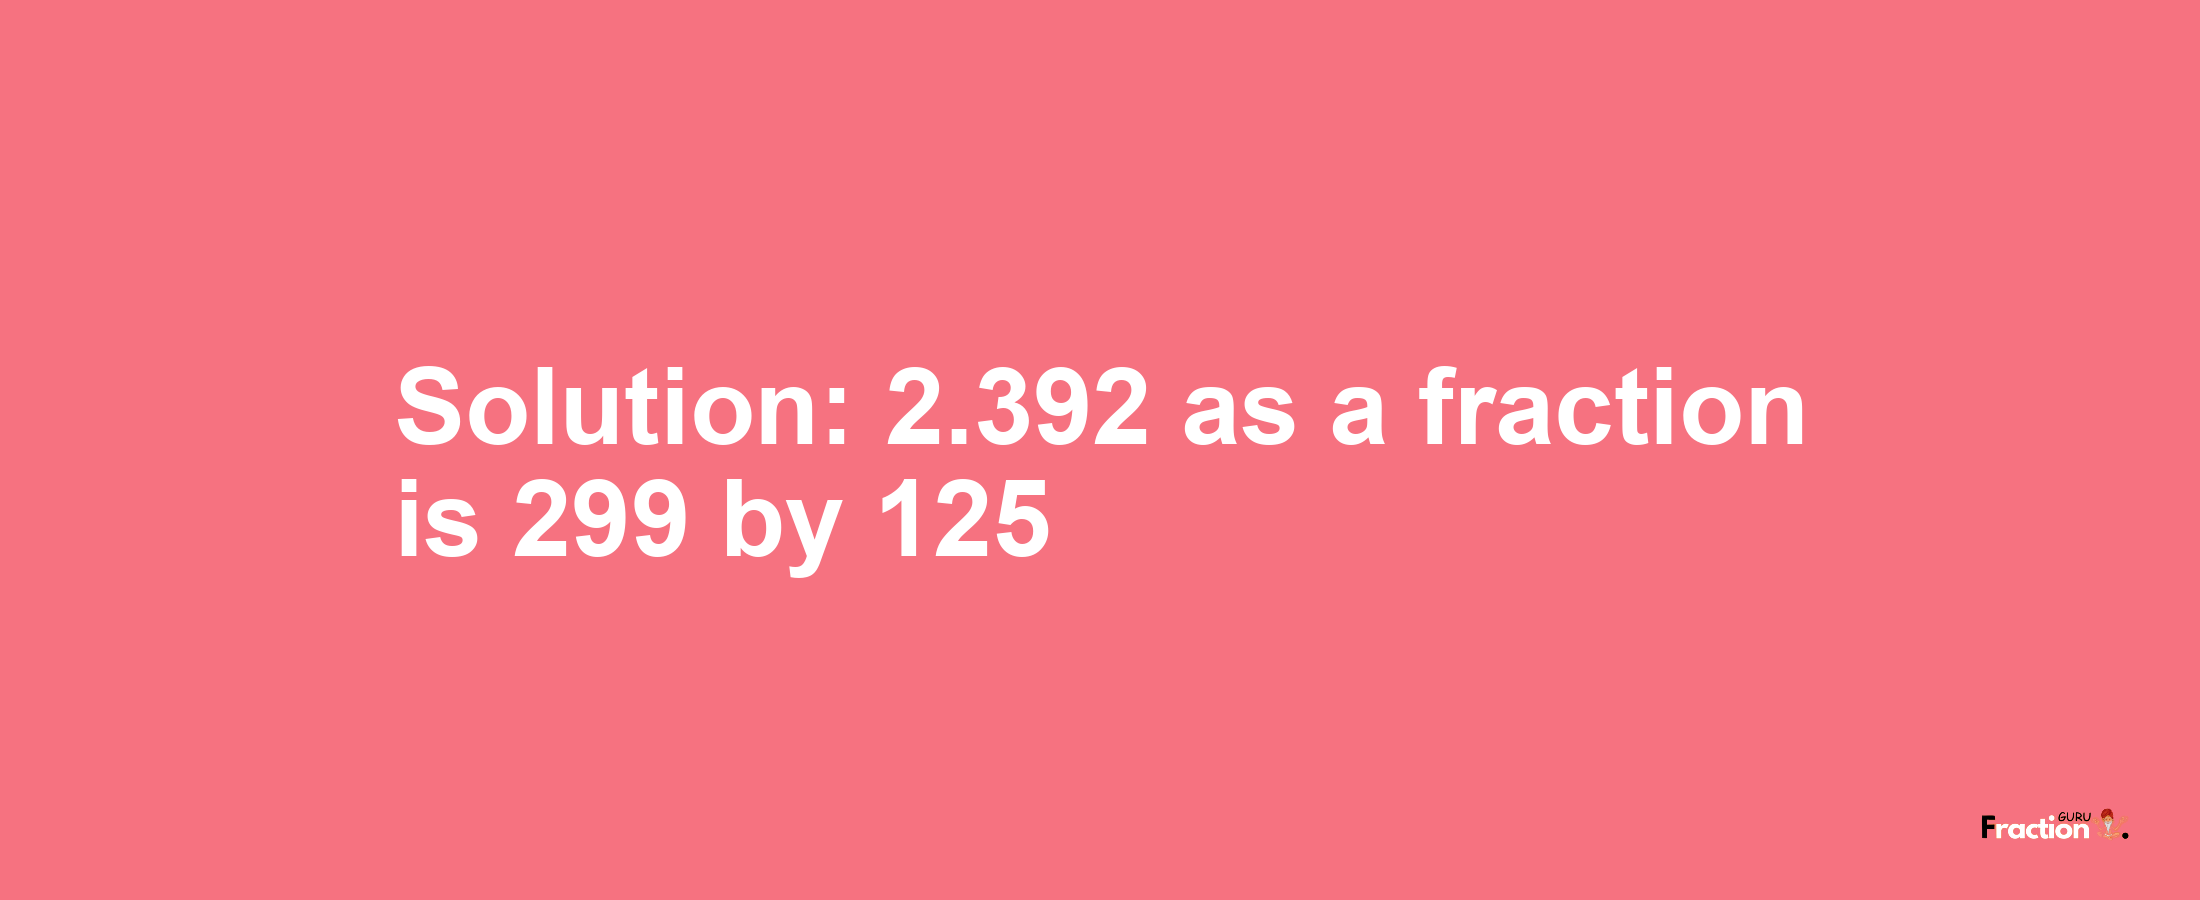 Solution:2.392 as a fraction is 299/125